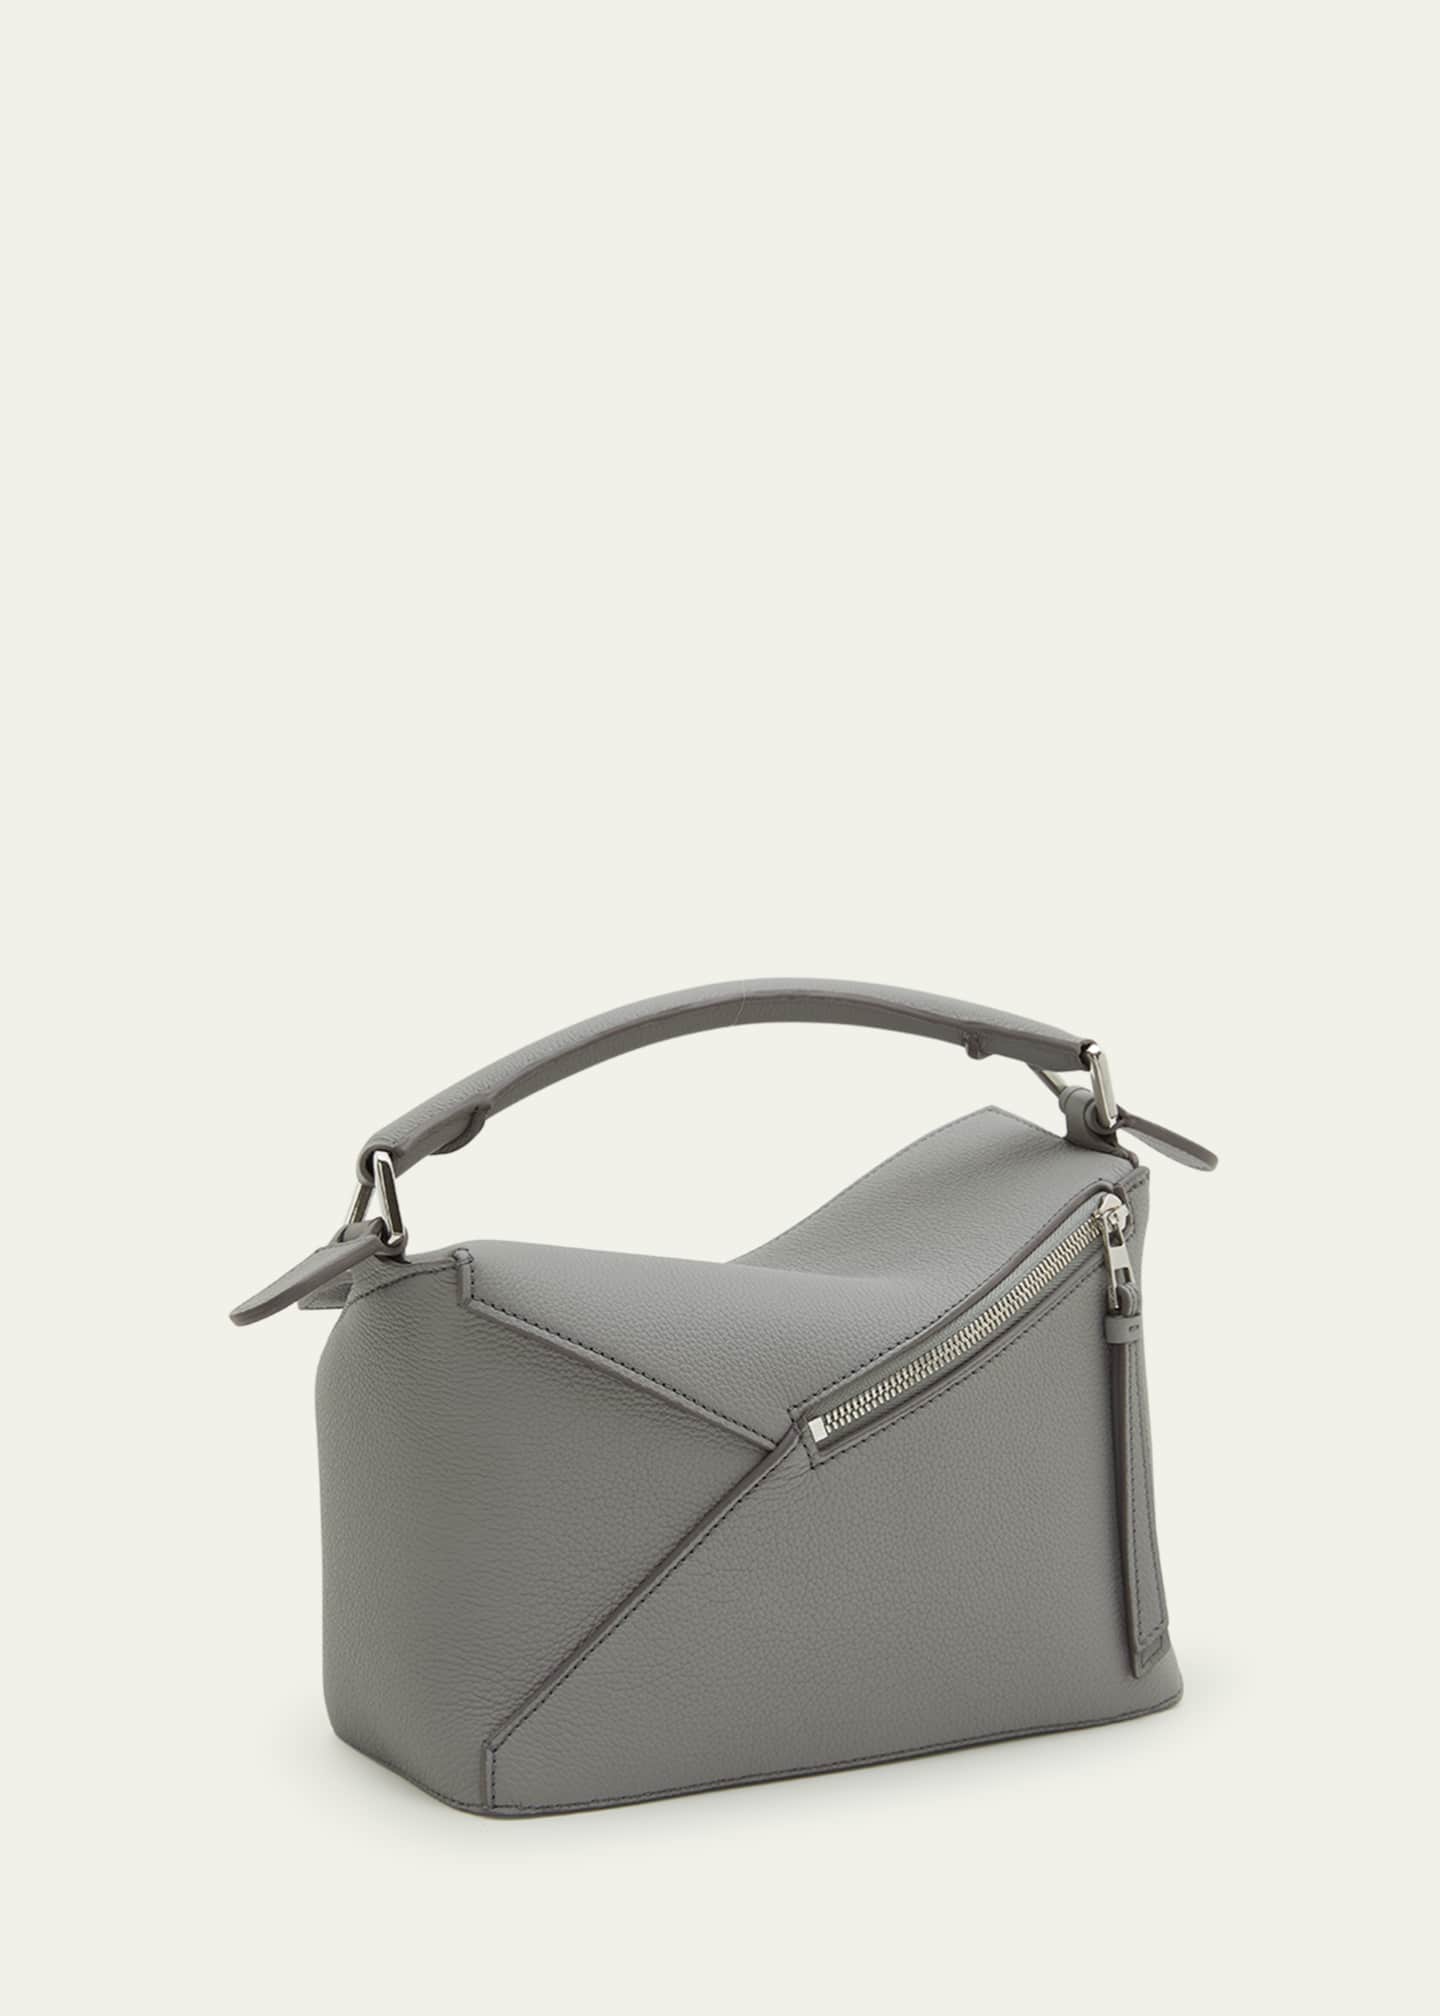 Puzzle Edge Small Leather Shoulder Bag in Green - Loewe